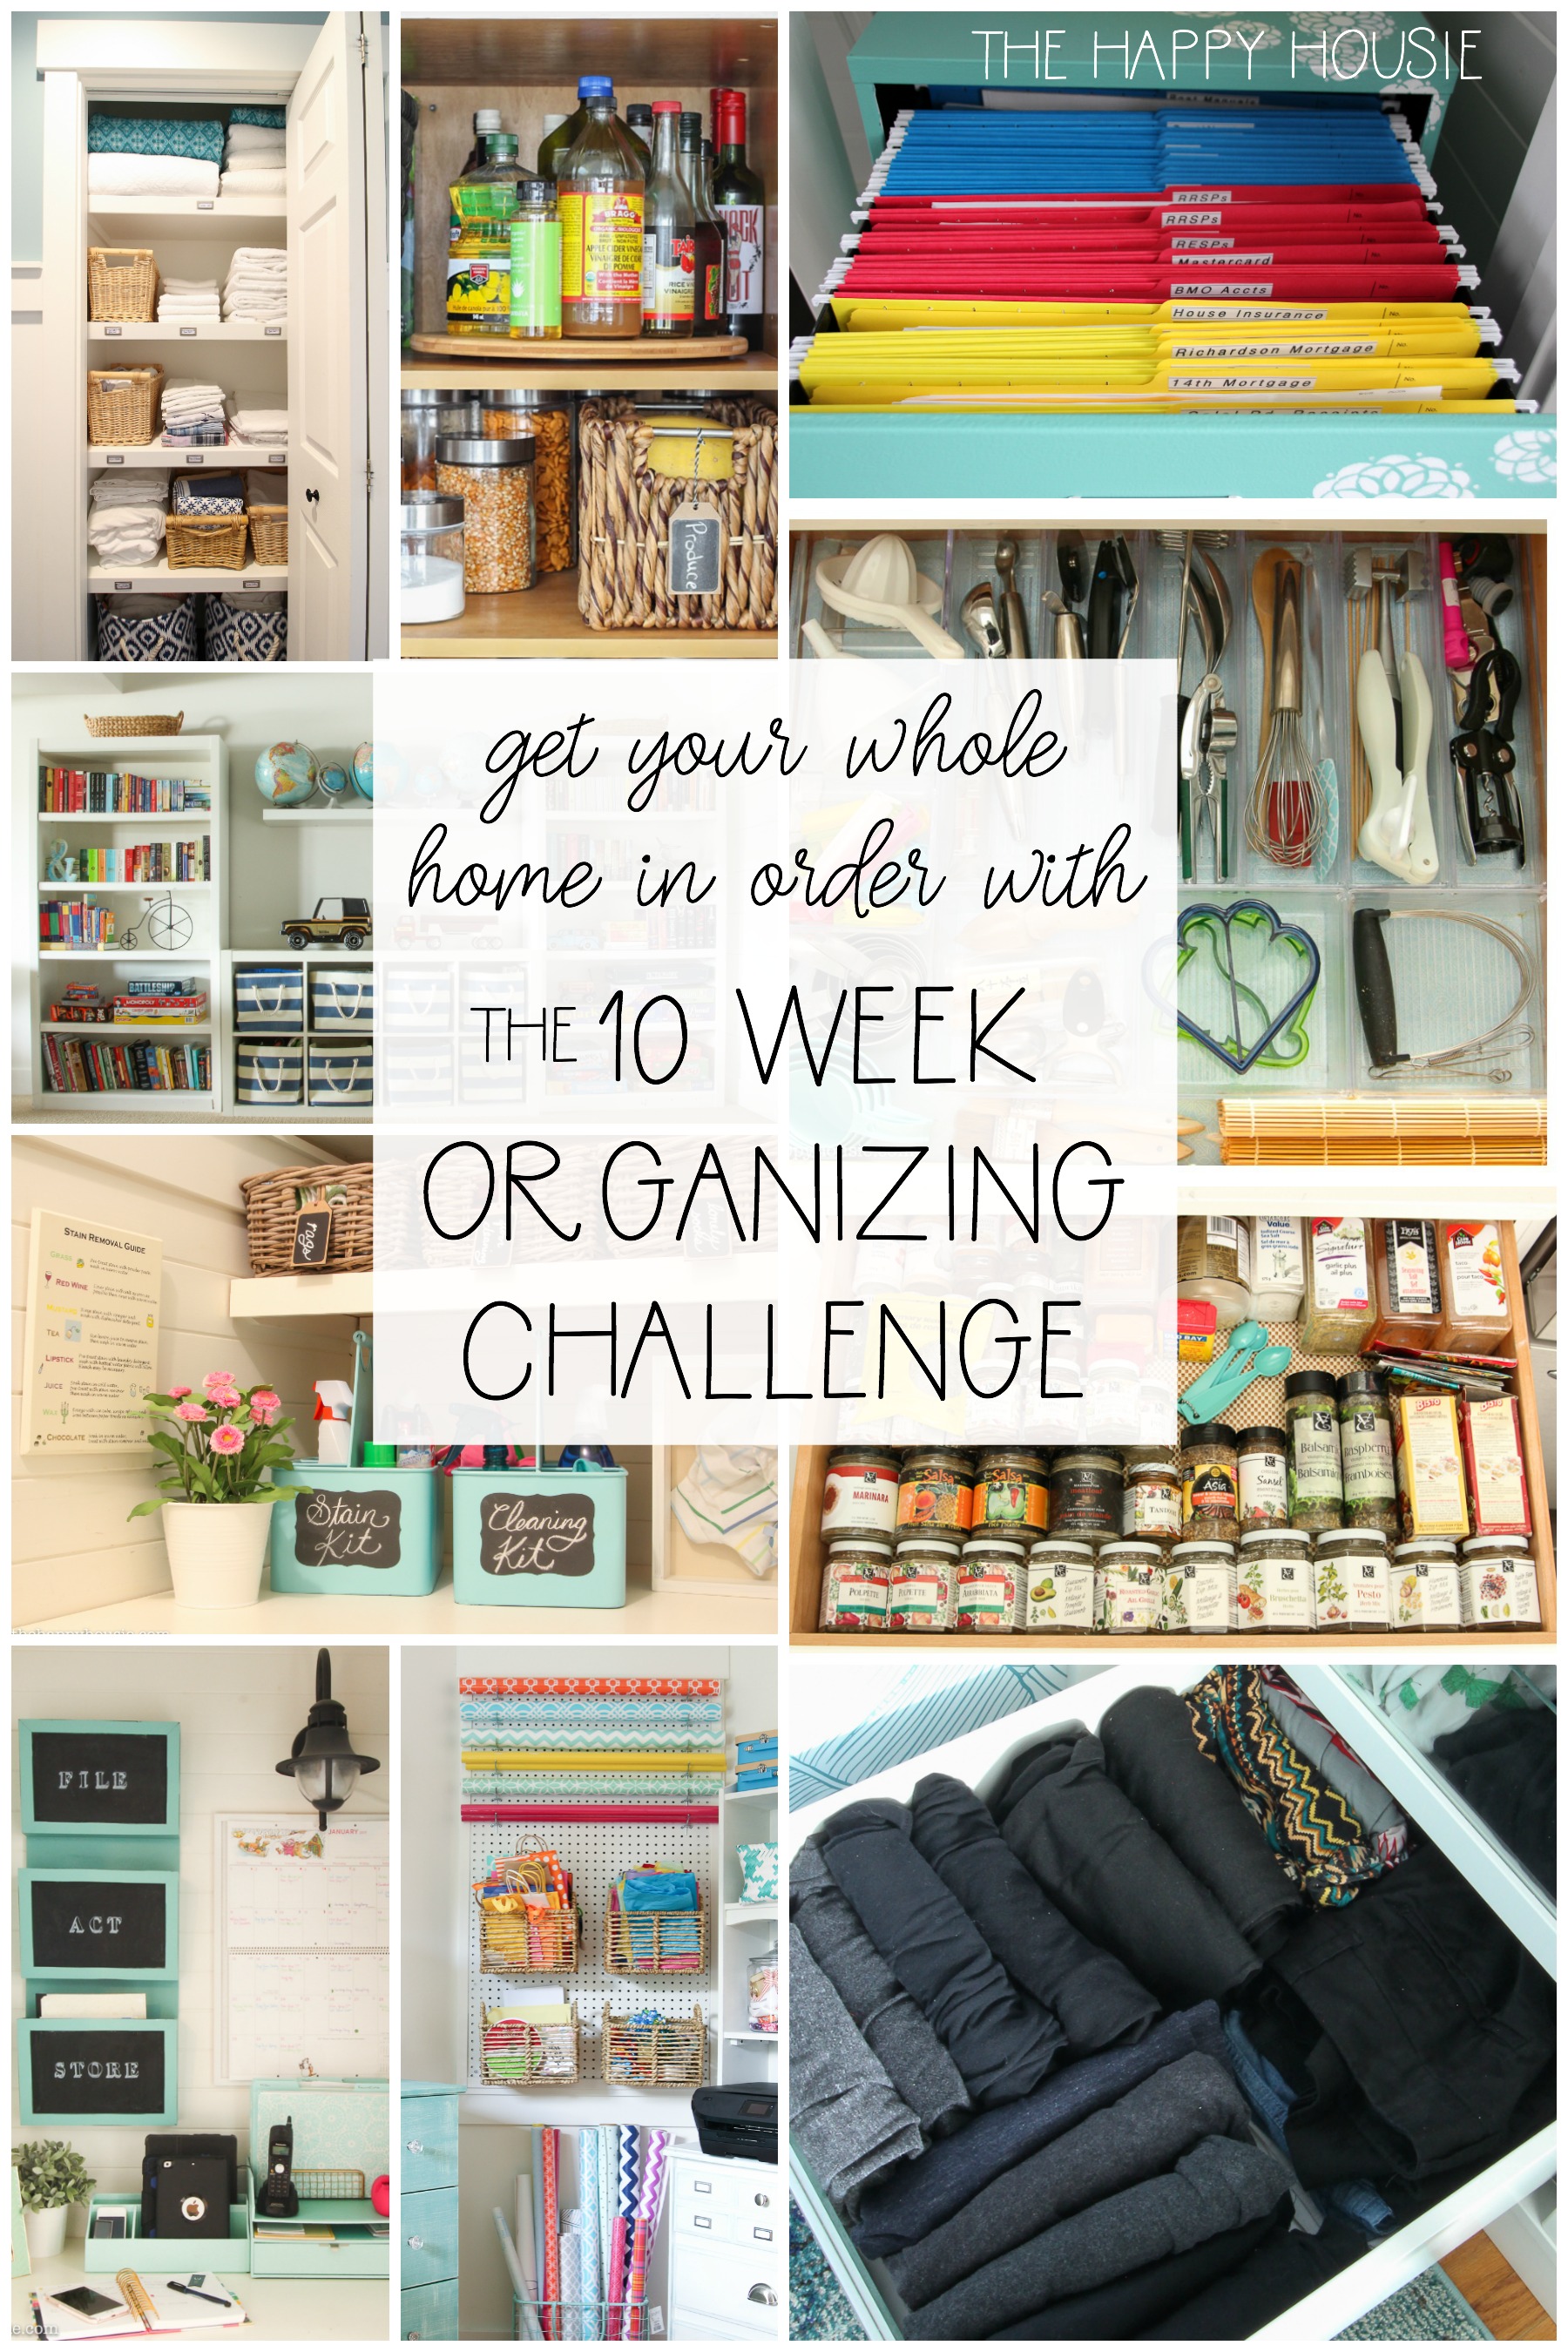 https://www.thehappyhousie.com/wp-content/uploads/2020/01/get-your-whole-home-in-order-with-the-ten-week-organizing-challenge-at-the-happy-housie.jpg